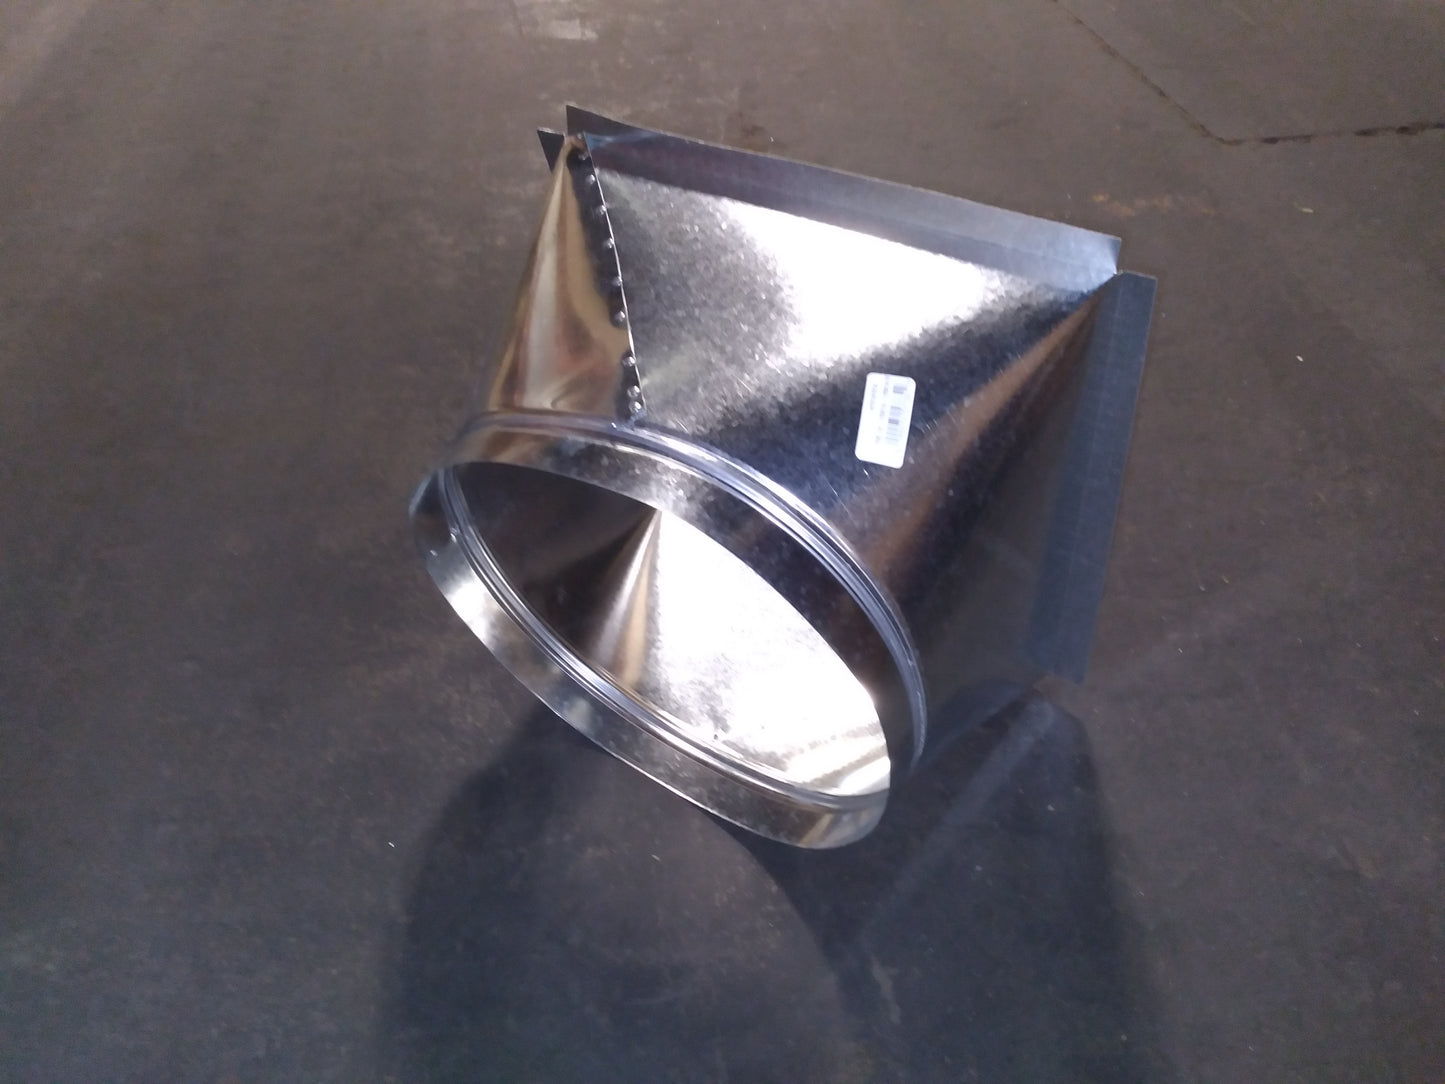 14-1/2" X 14-1/2" X 14" SQUARE TO ROUND BOOT ADAPTER